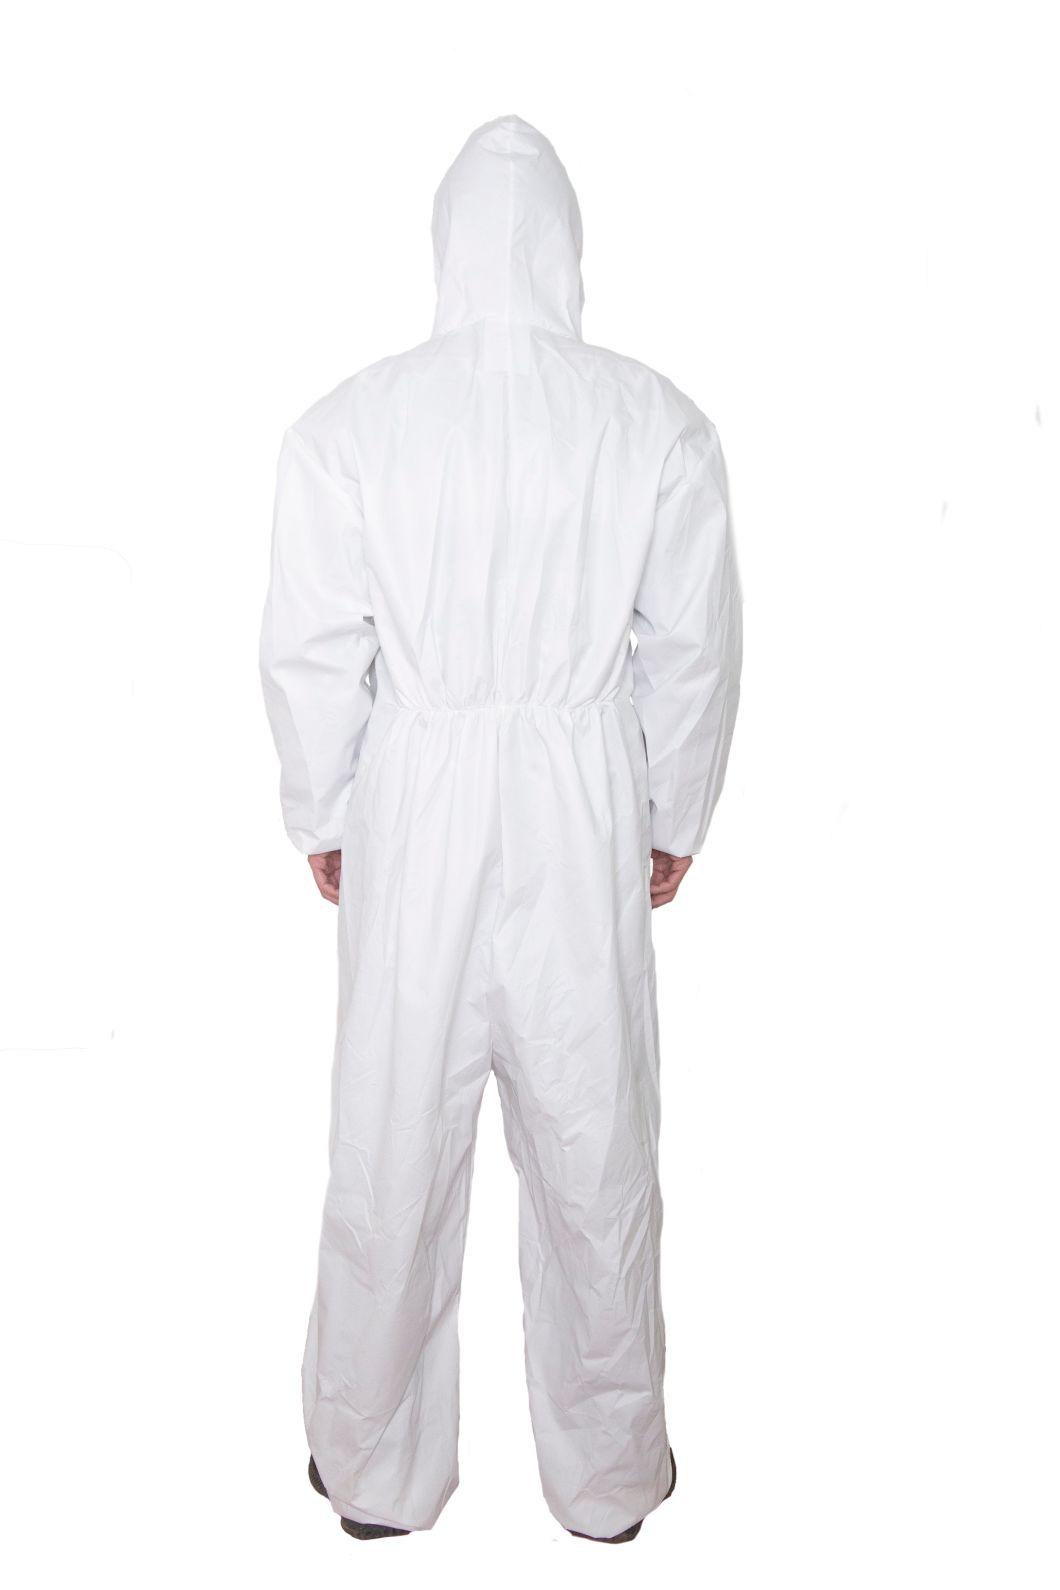 Yourfiled High Quality Disposable Isoaltion Coverall